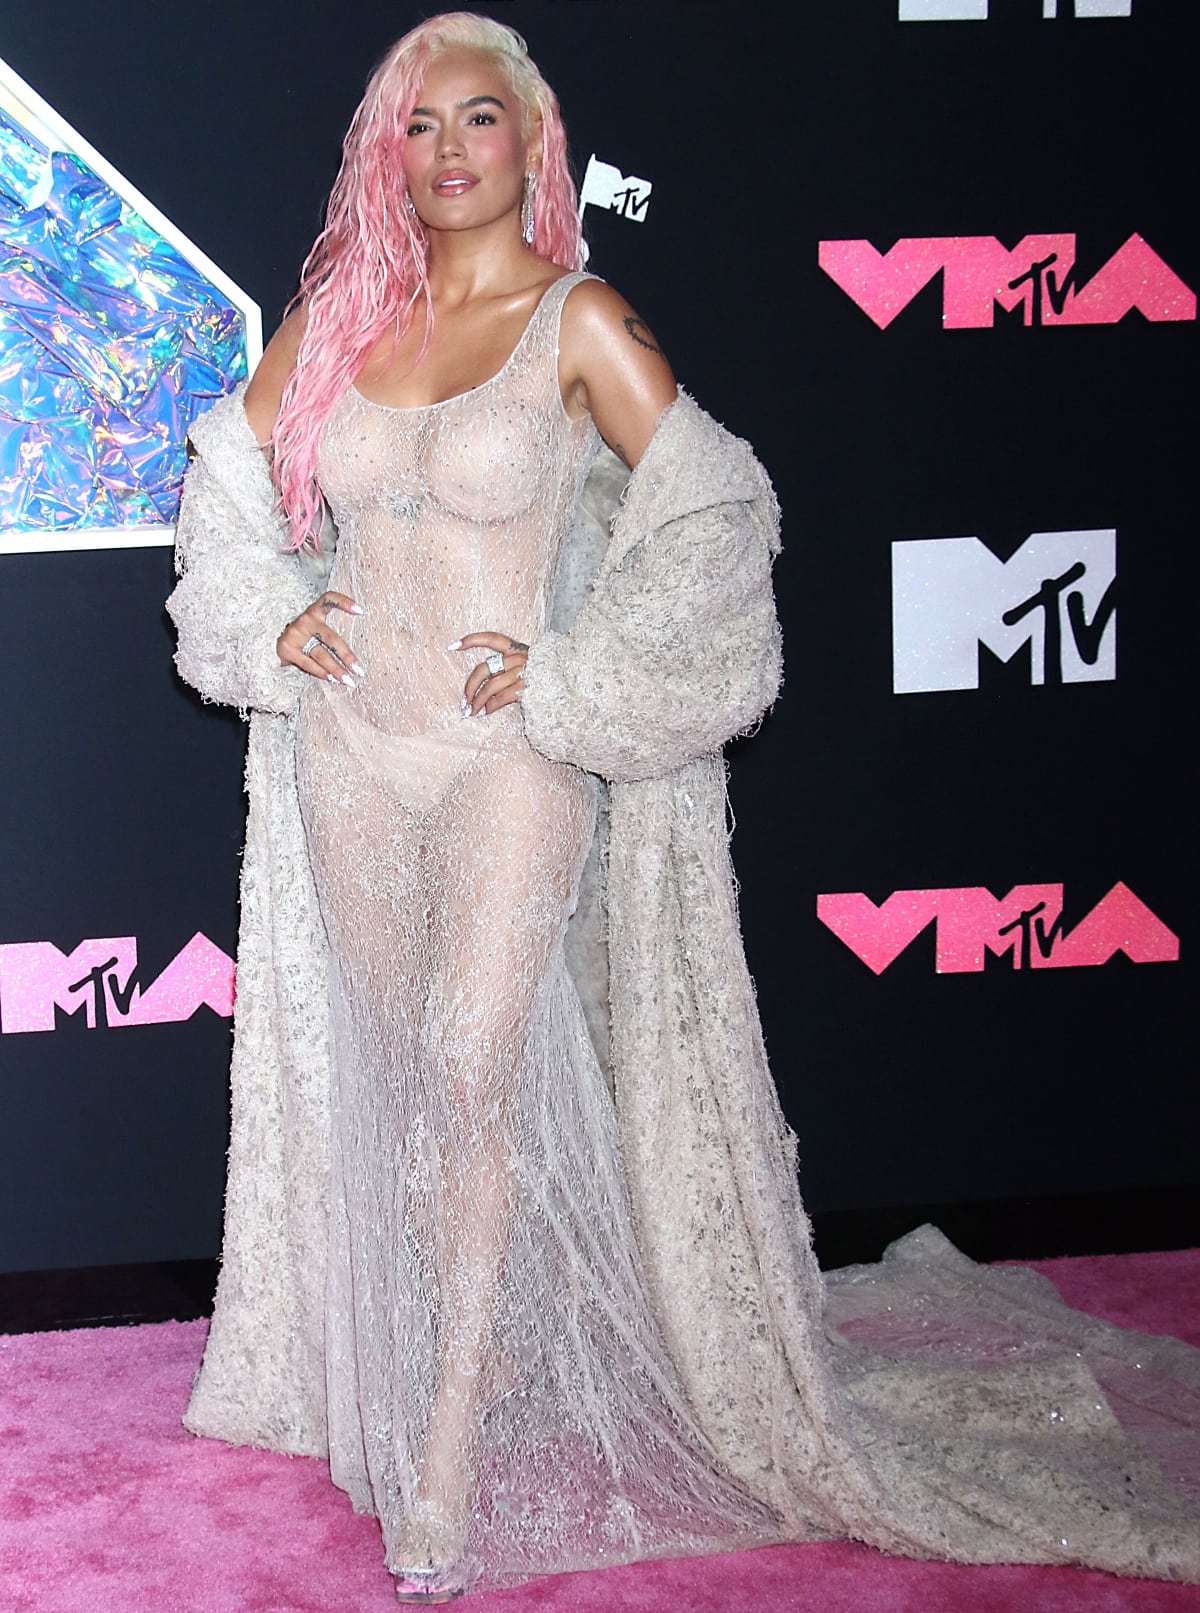 Karol G making a head-turning entrance in a sheer nude lace gown from Ashi Studio’s Fall 2023 couture collection at the 2023 MTV Video Music Awards